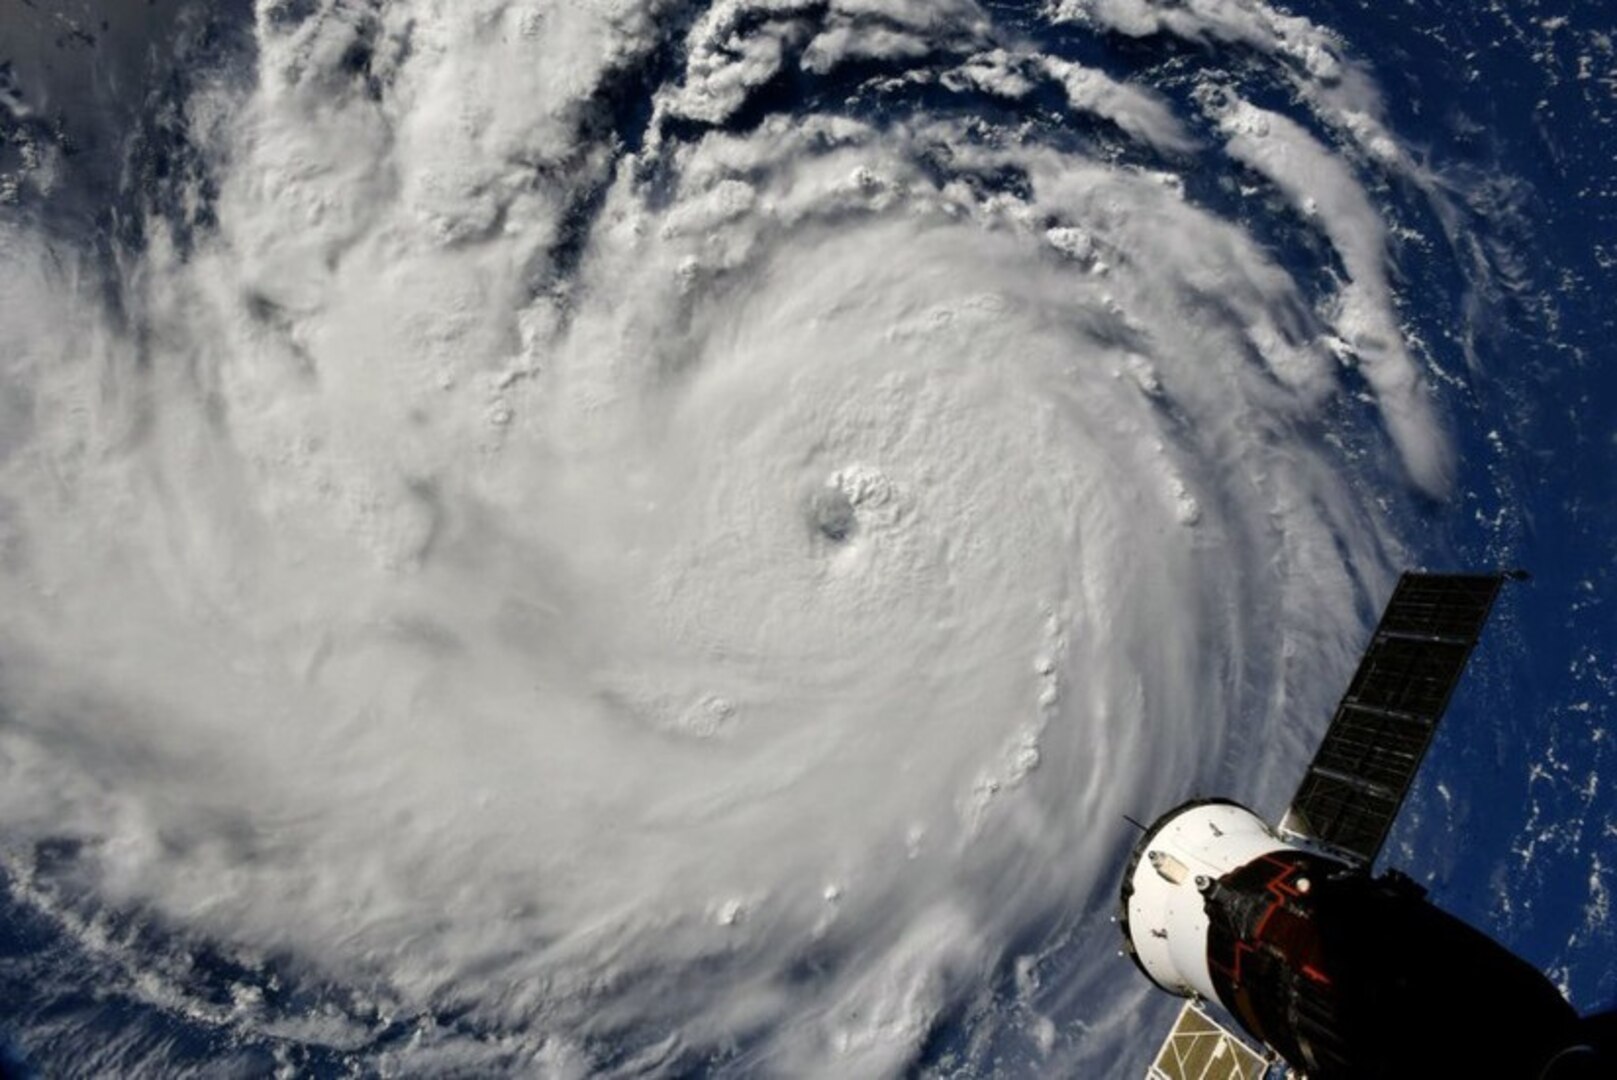 As Hurricane Florence bears down on the U.S. East Coast, the Department of Defense will update this page (https://dod.defense.gov/News/Article/Article/1628035/information-and-resources-hurricane-florence/) with the latest information, including tips for preparedness and dealing with the storm’s aftermath.